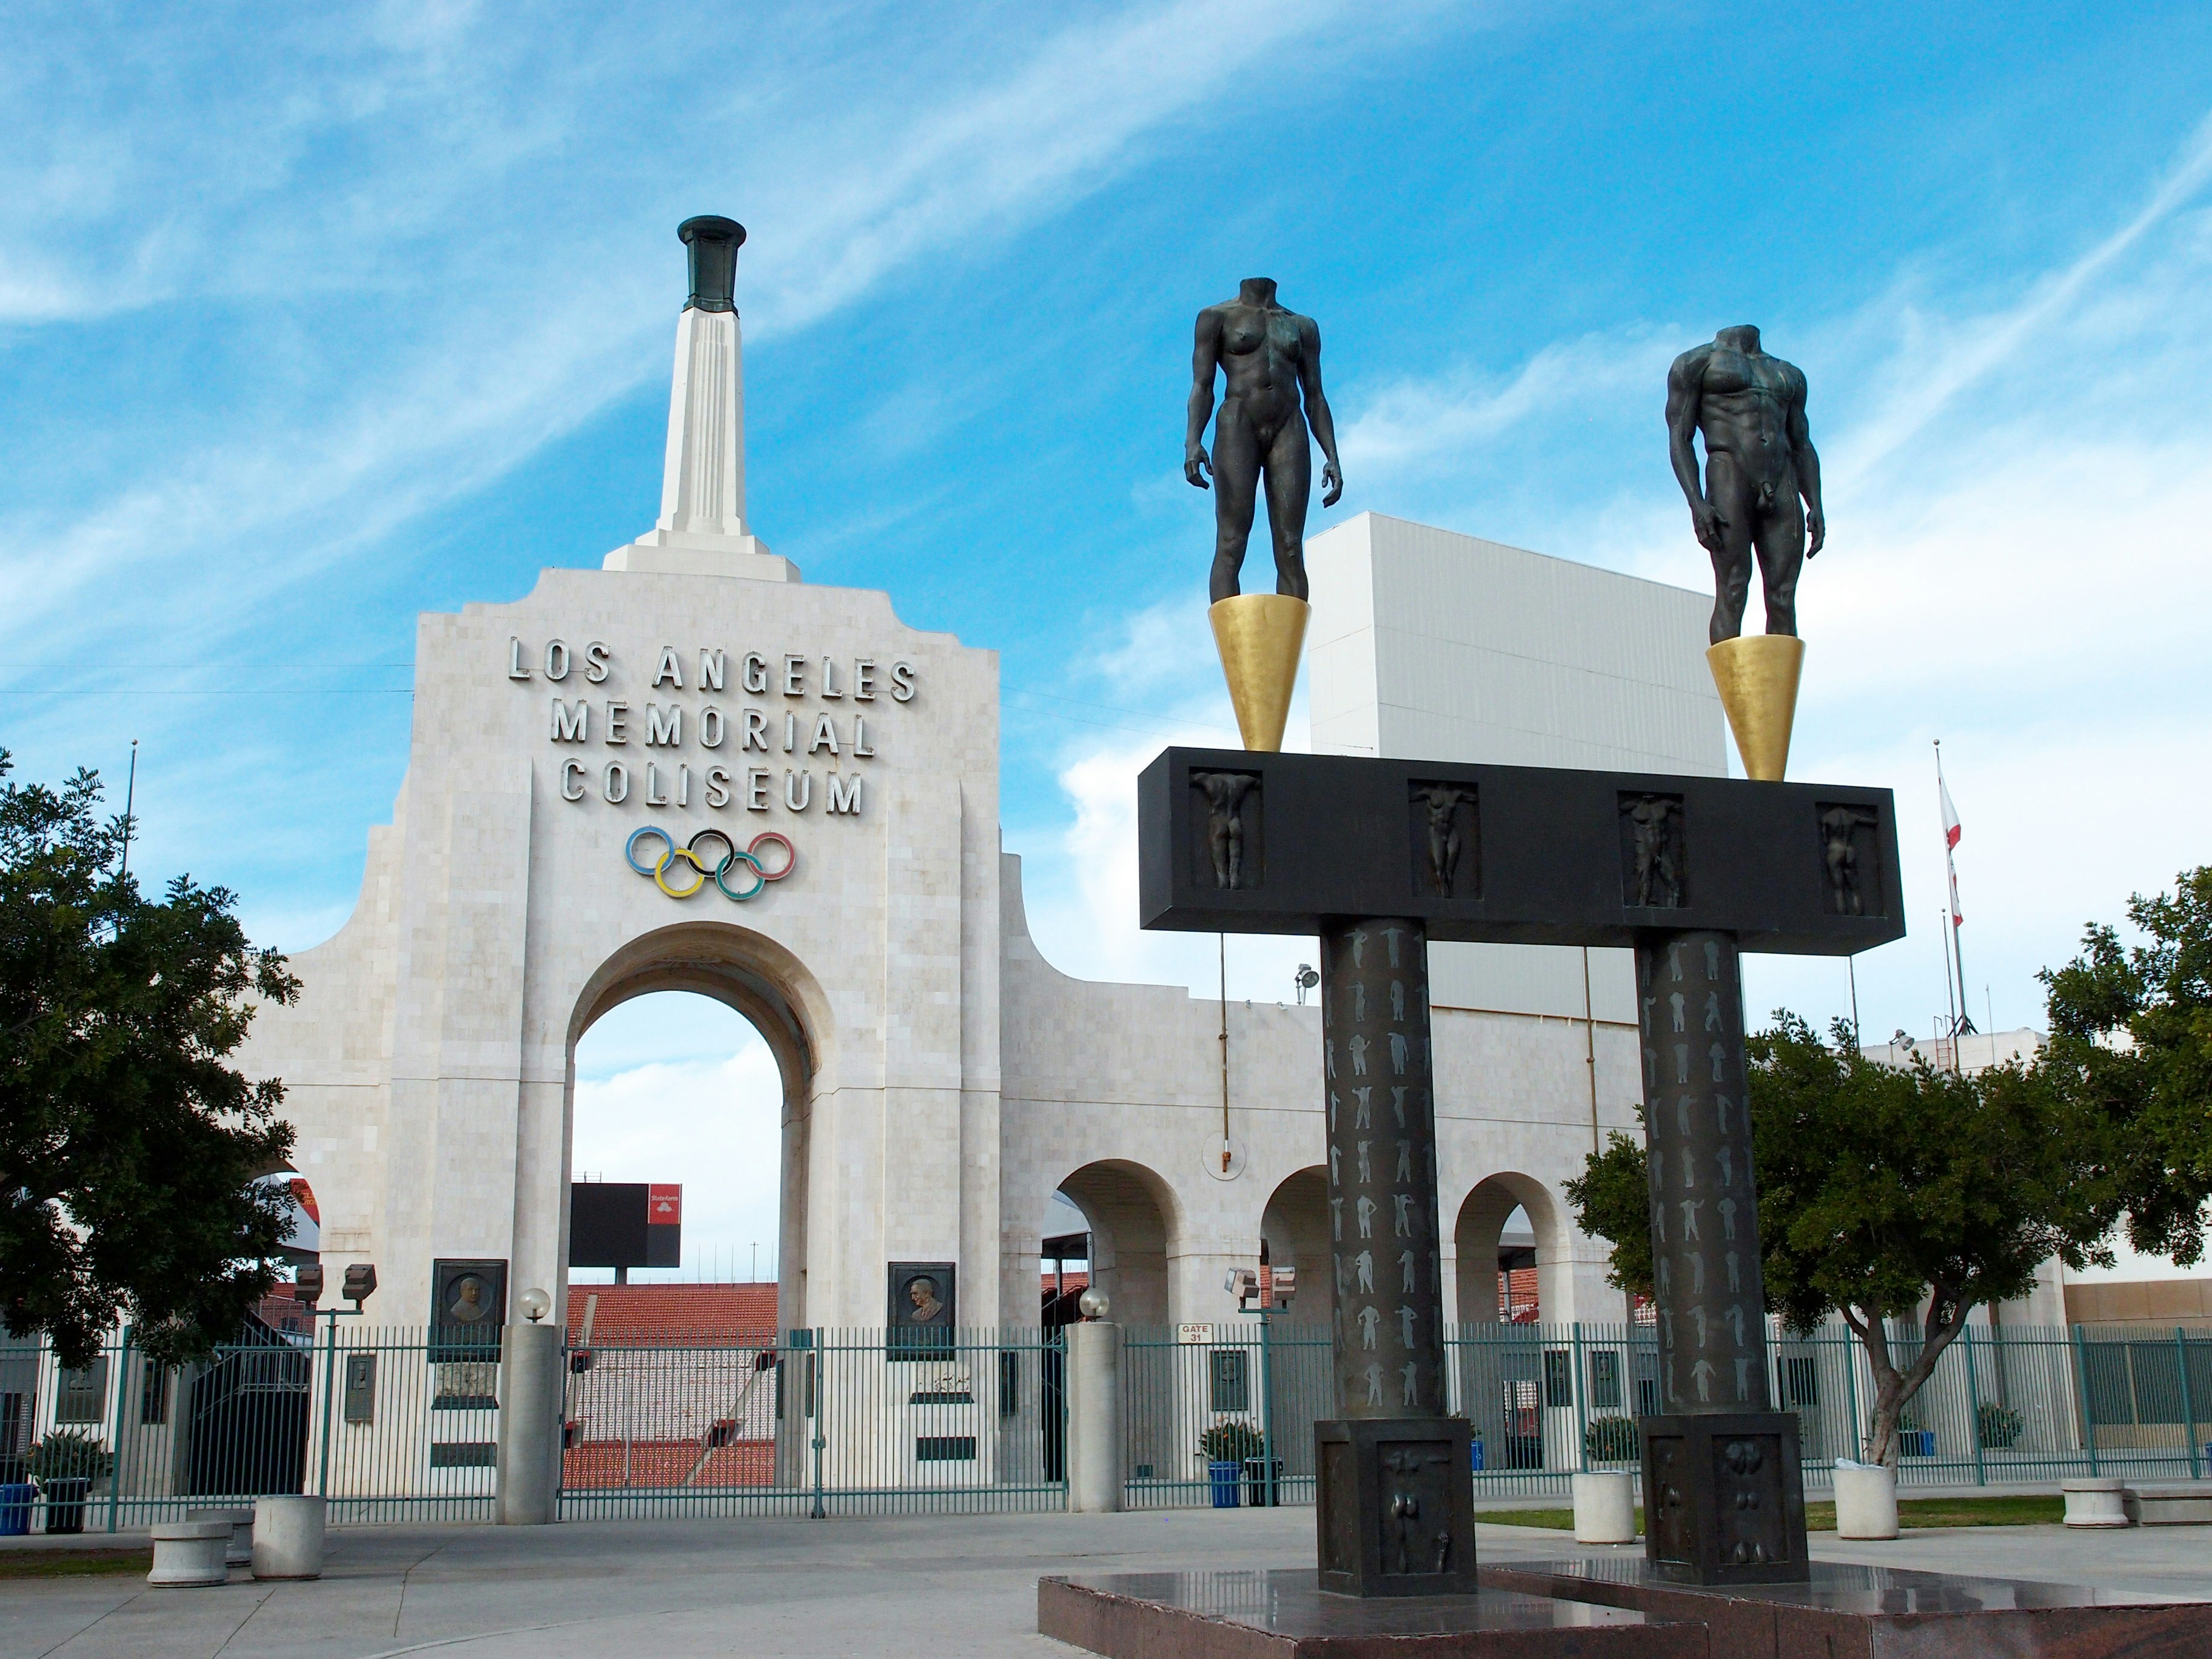 Exterior shot of the Los Angeles Coliseum. There are a pair of headless statues standing on golden cones. 